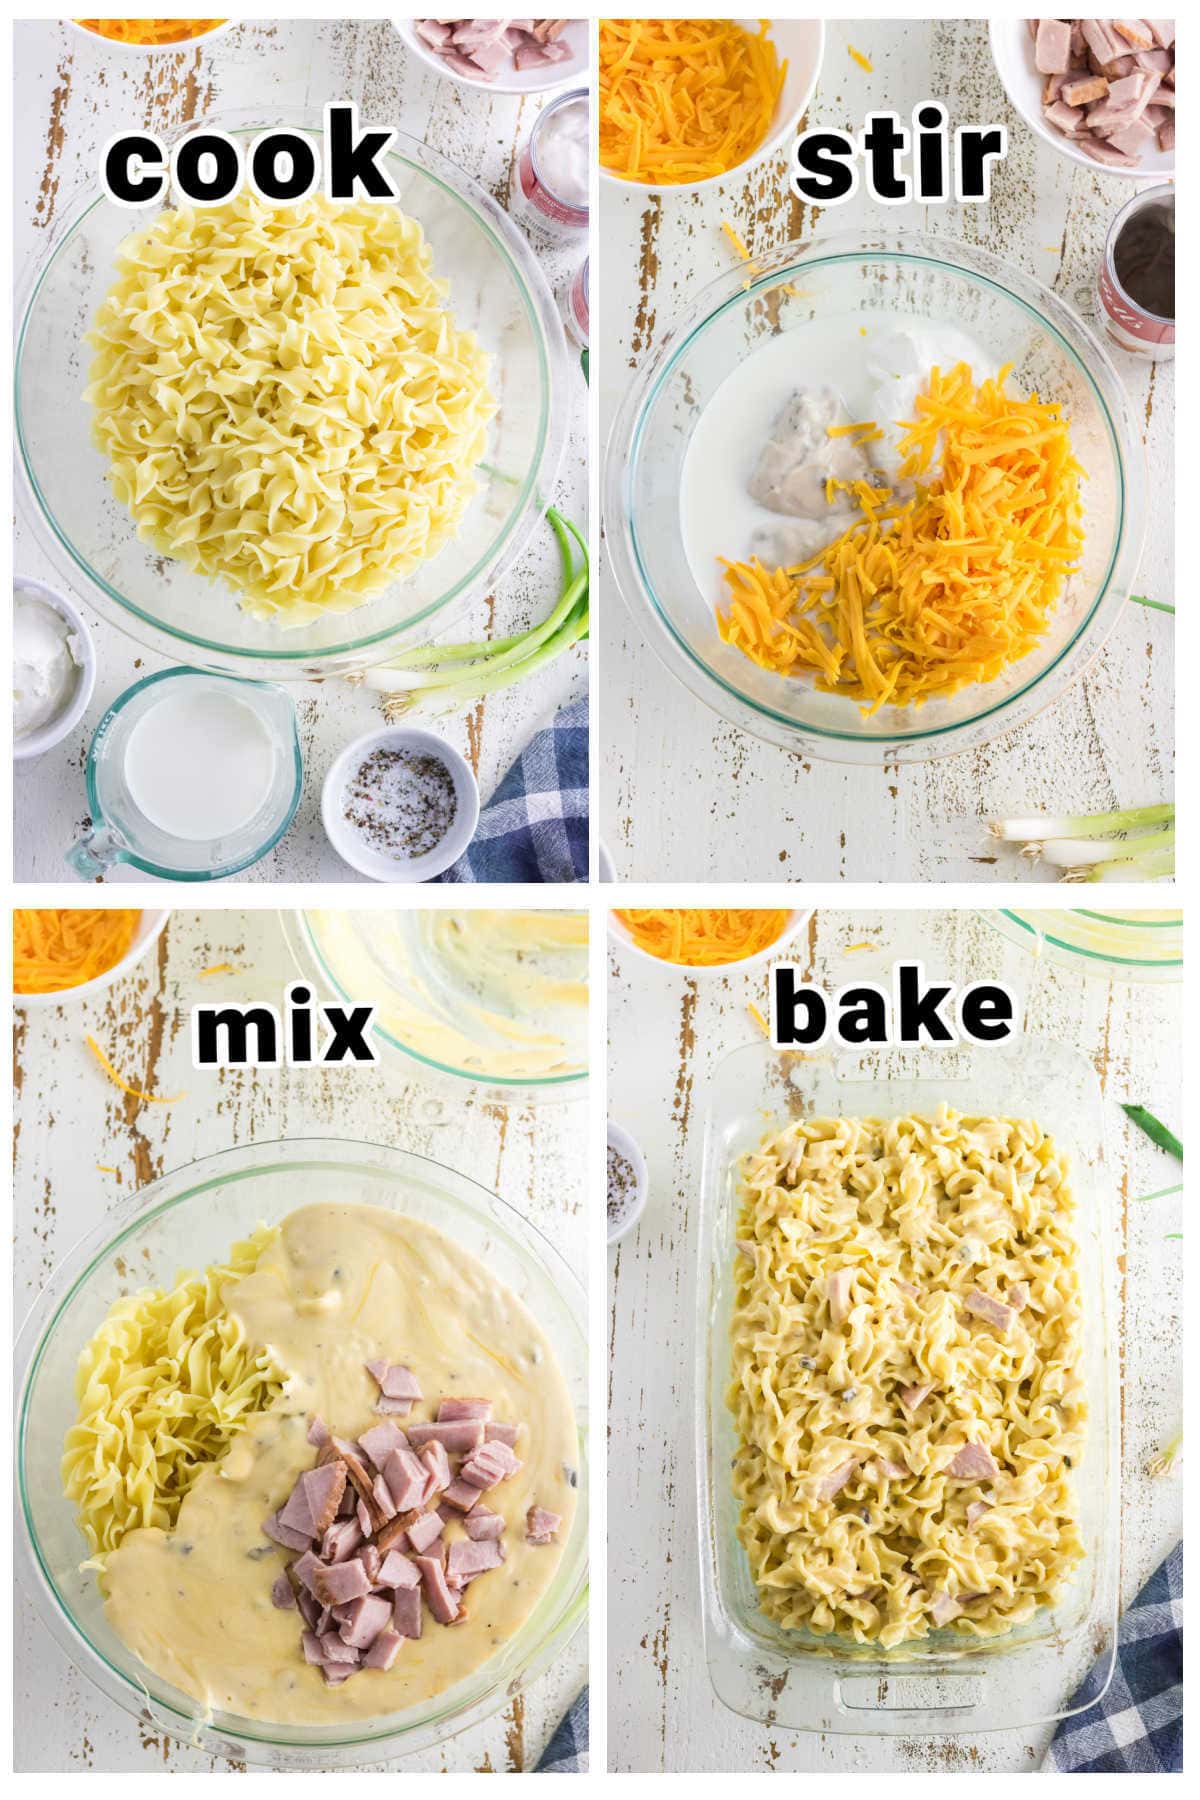 Step by step images showing how to make ham and noodle casserole.